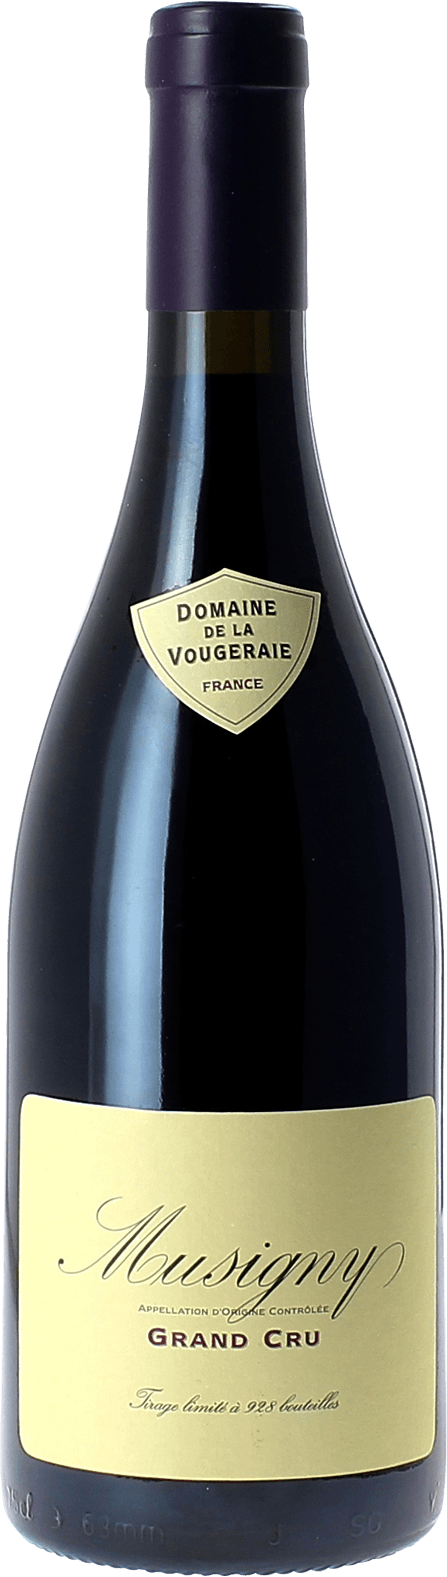 Musigny grand cru 2017 Domaine VOUGERAIE, Bourgogne rouge